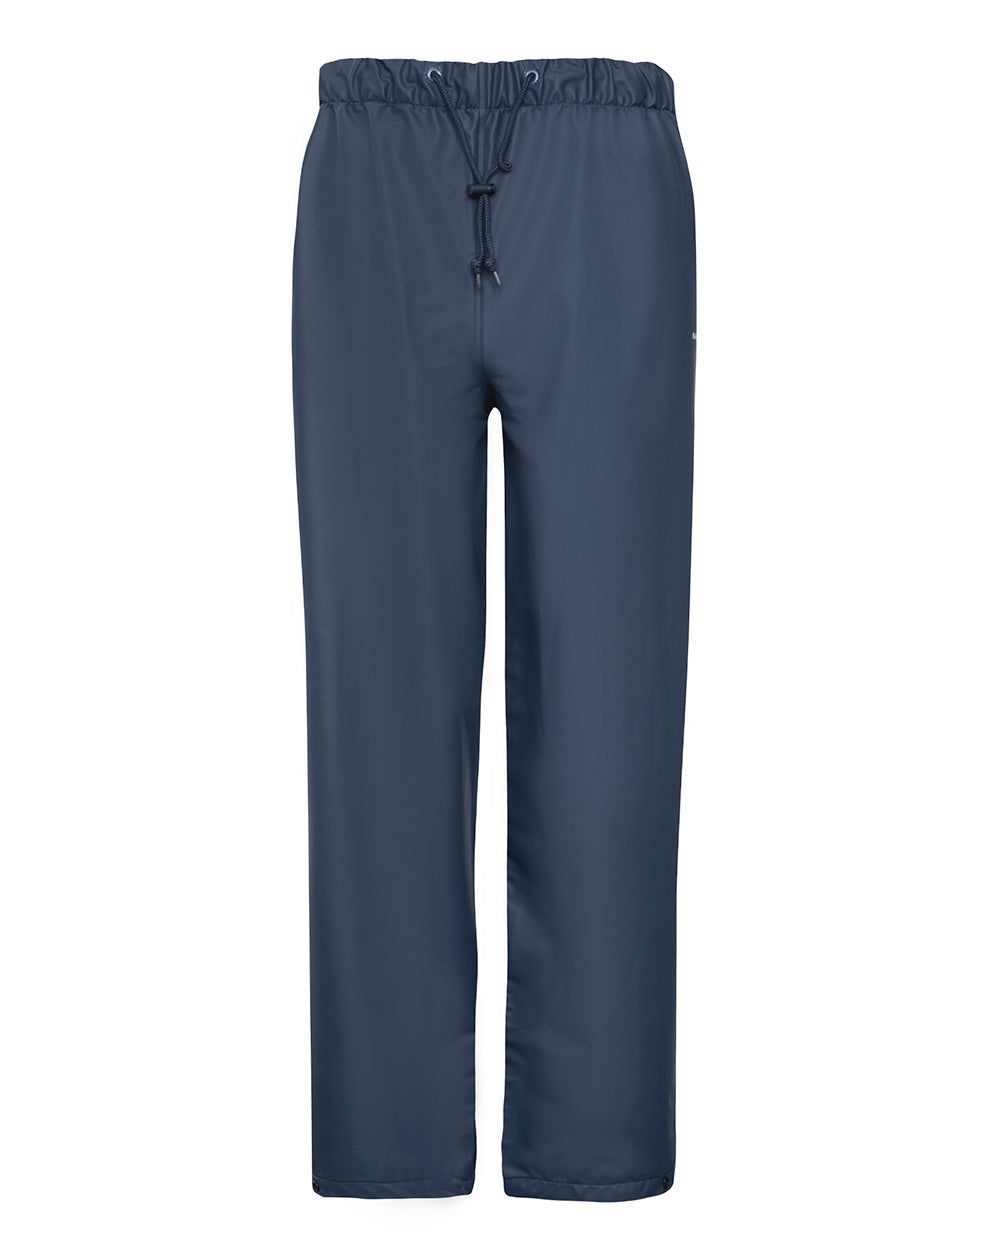 Shelter Pant in Navy